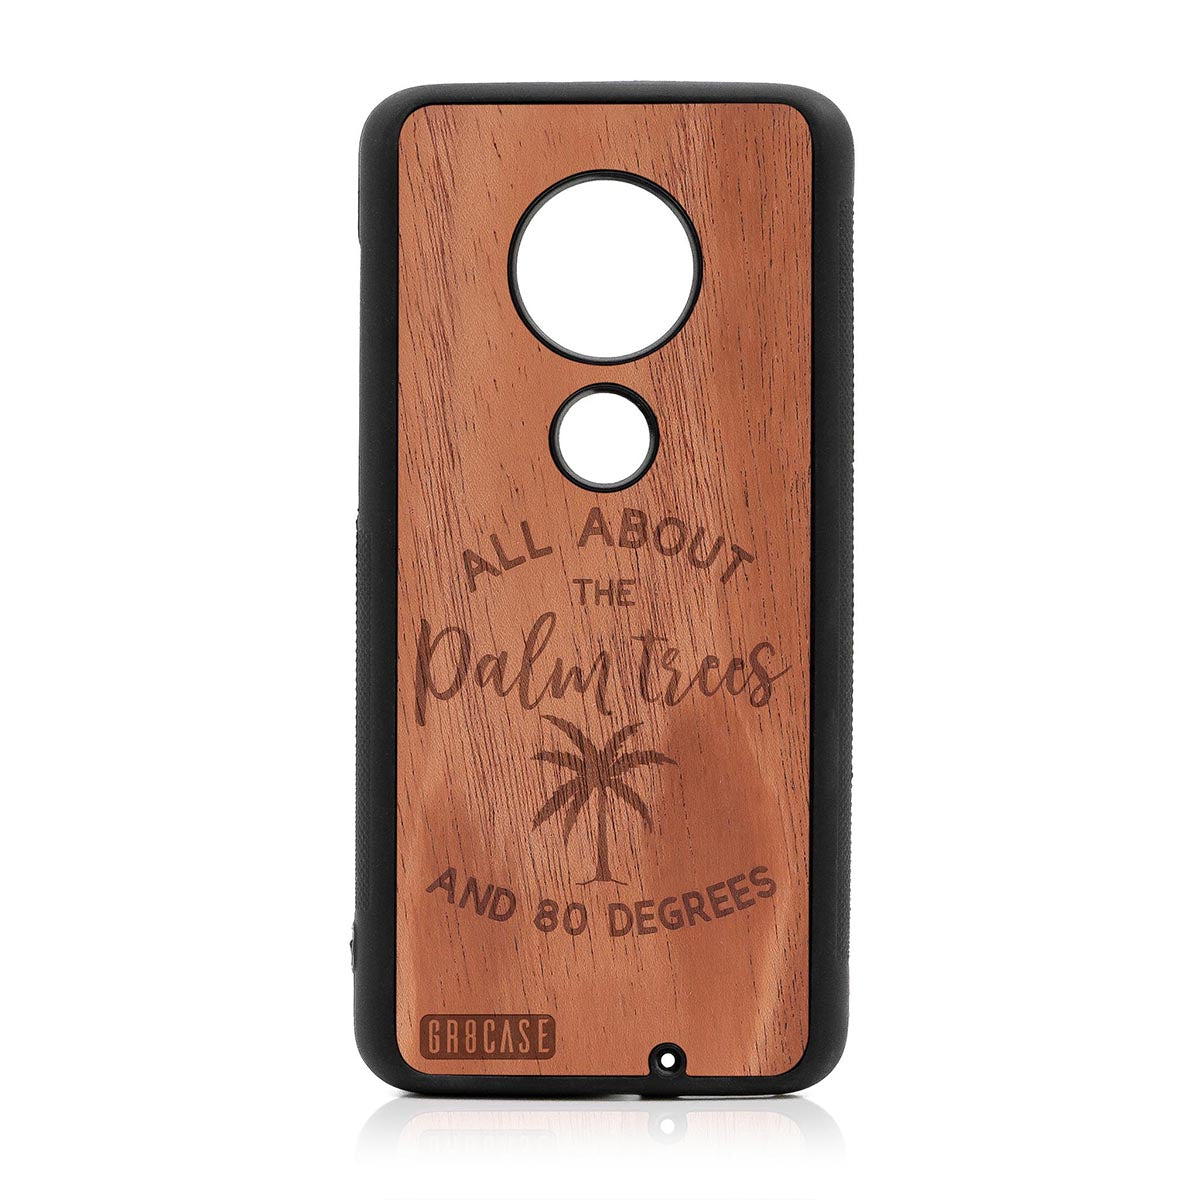 All About The Palm Trees and 80 Degrees Design Wood Case For Moto G7 Plus by GR8CASE